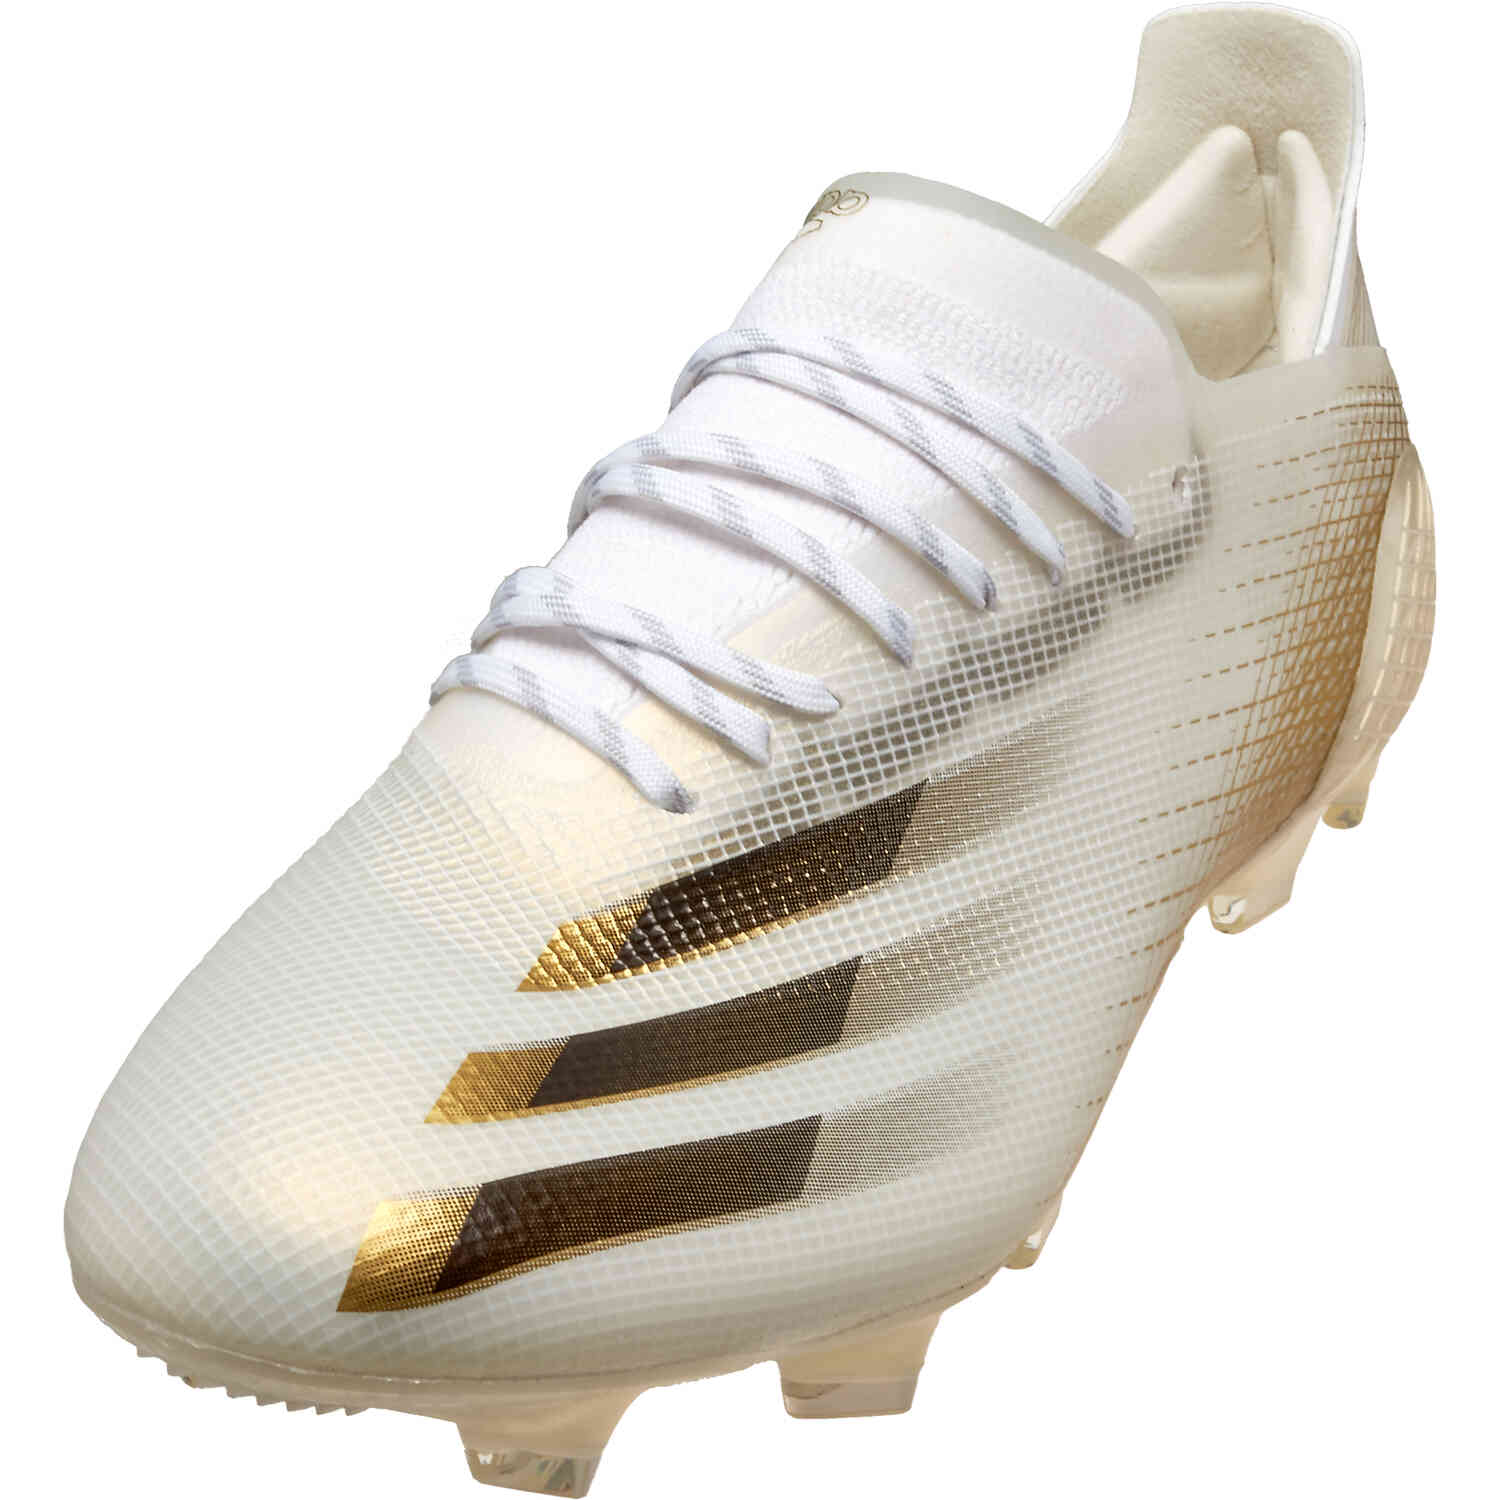 adidas X Ghosted.1 x ghosted adidas FG - InFlight - SoccerPro